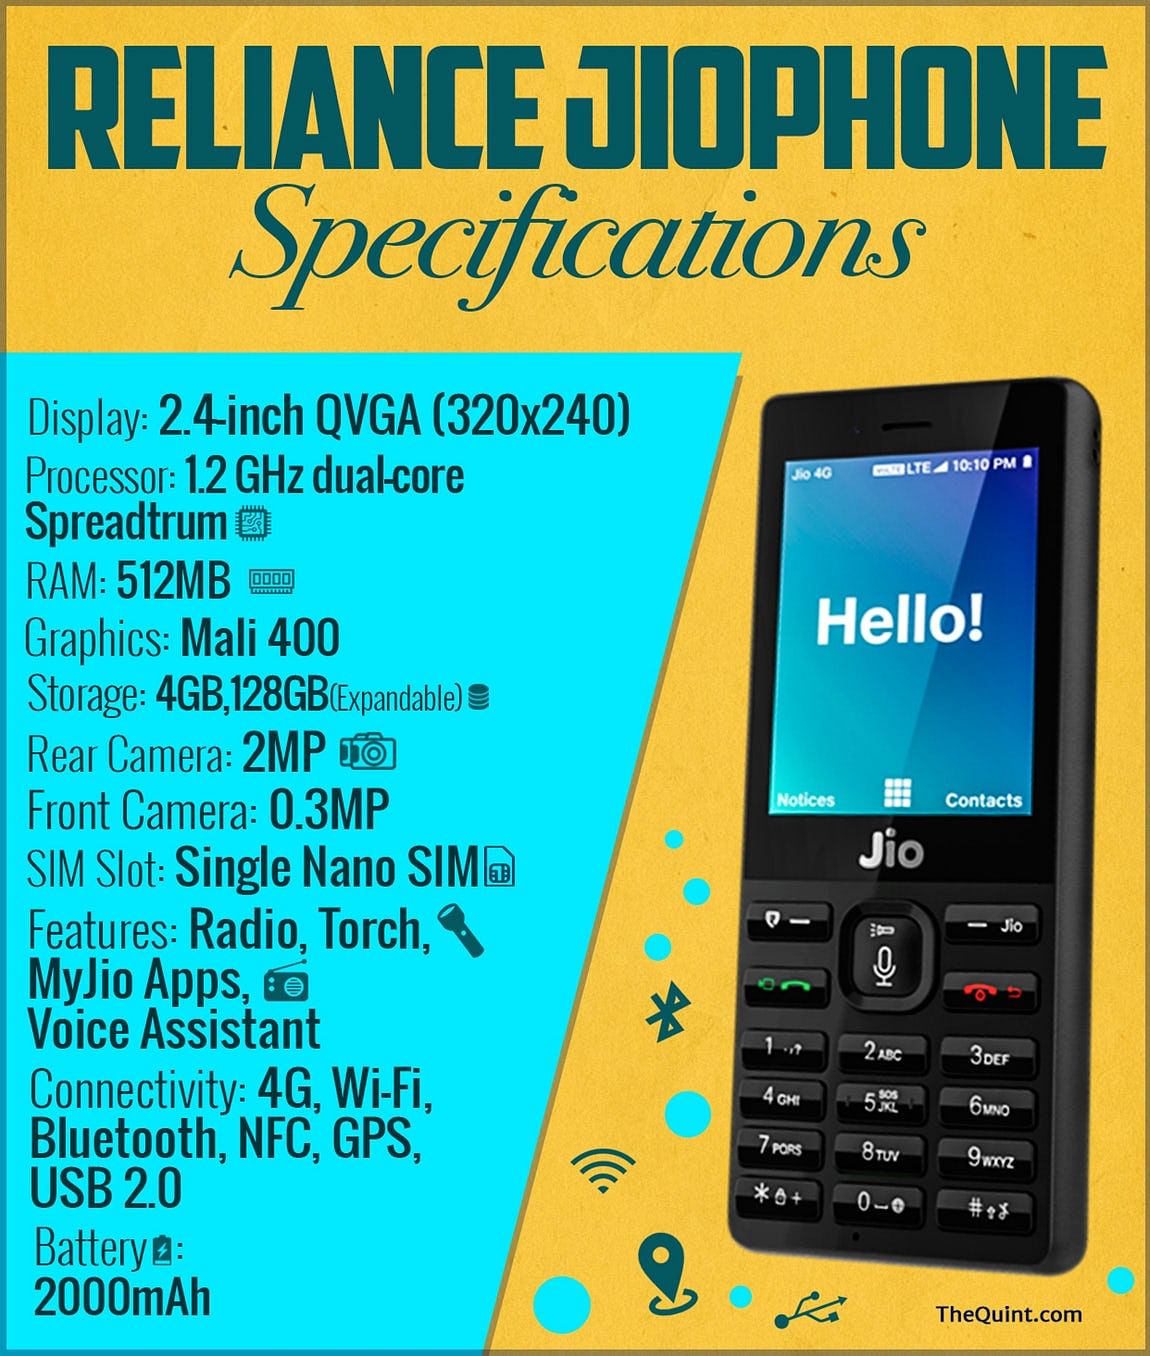 Reliance Jio had promised to start delivering the JioPhone by 1 September to those who had pre-booked it.